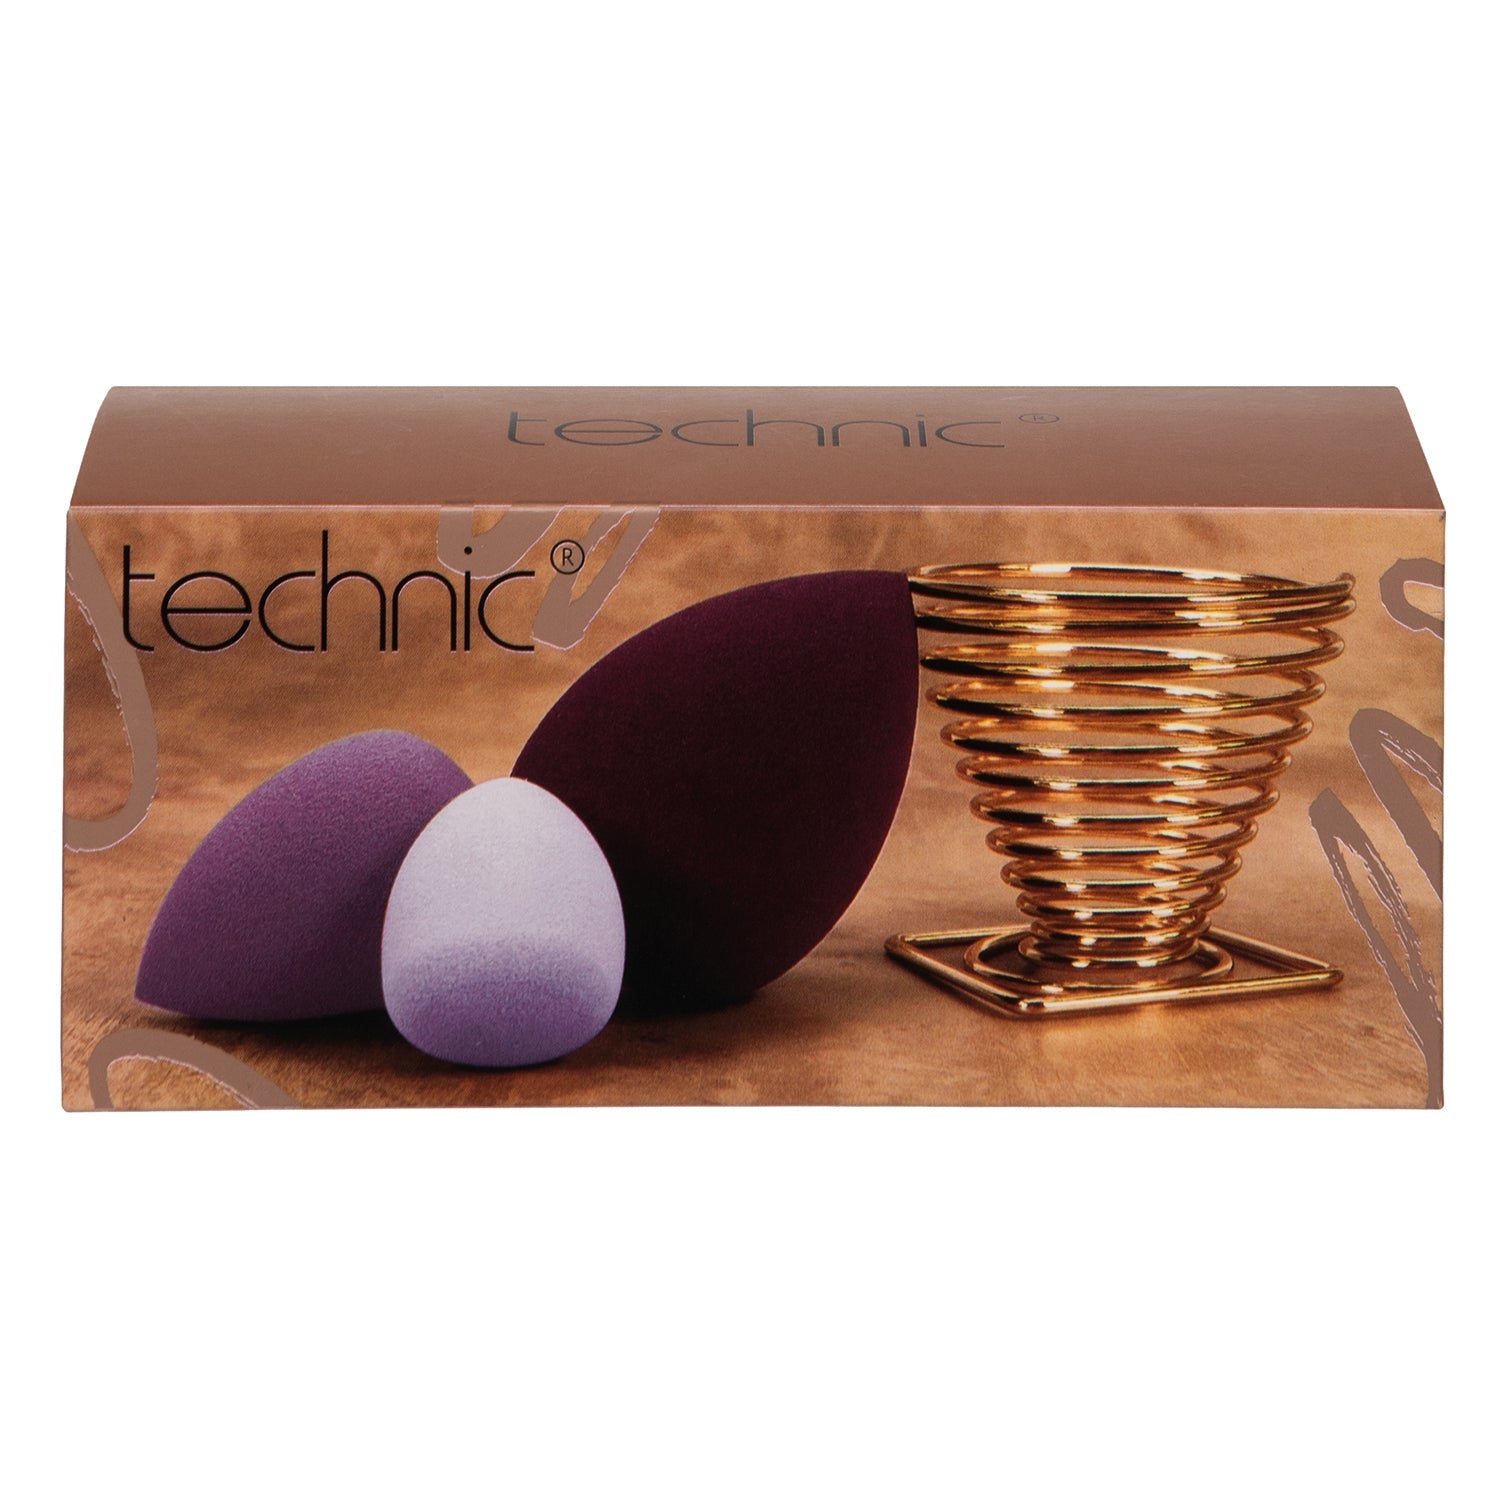 Technic Beauty Makeup Blender Set With Holder by Badgequo - Creata Beauty - Professional Beauty Products